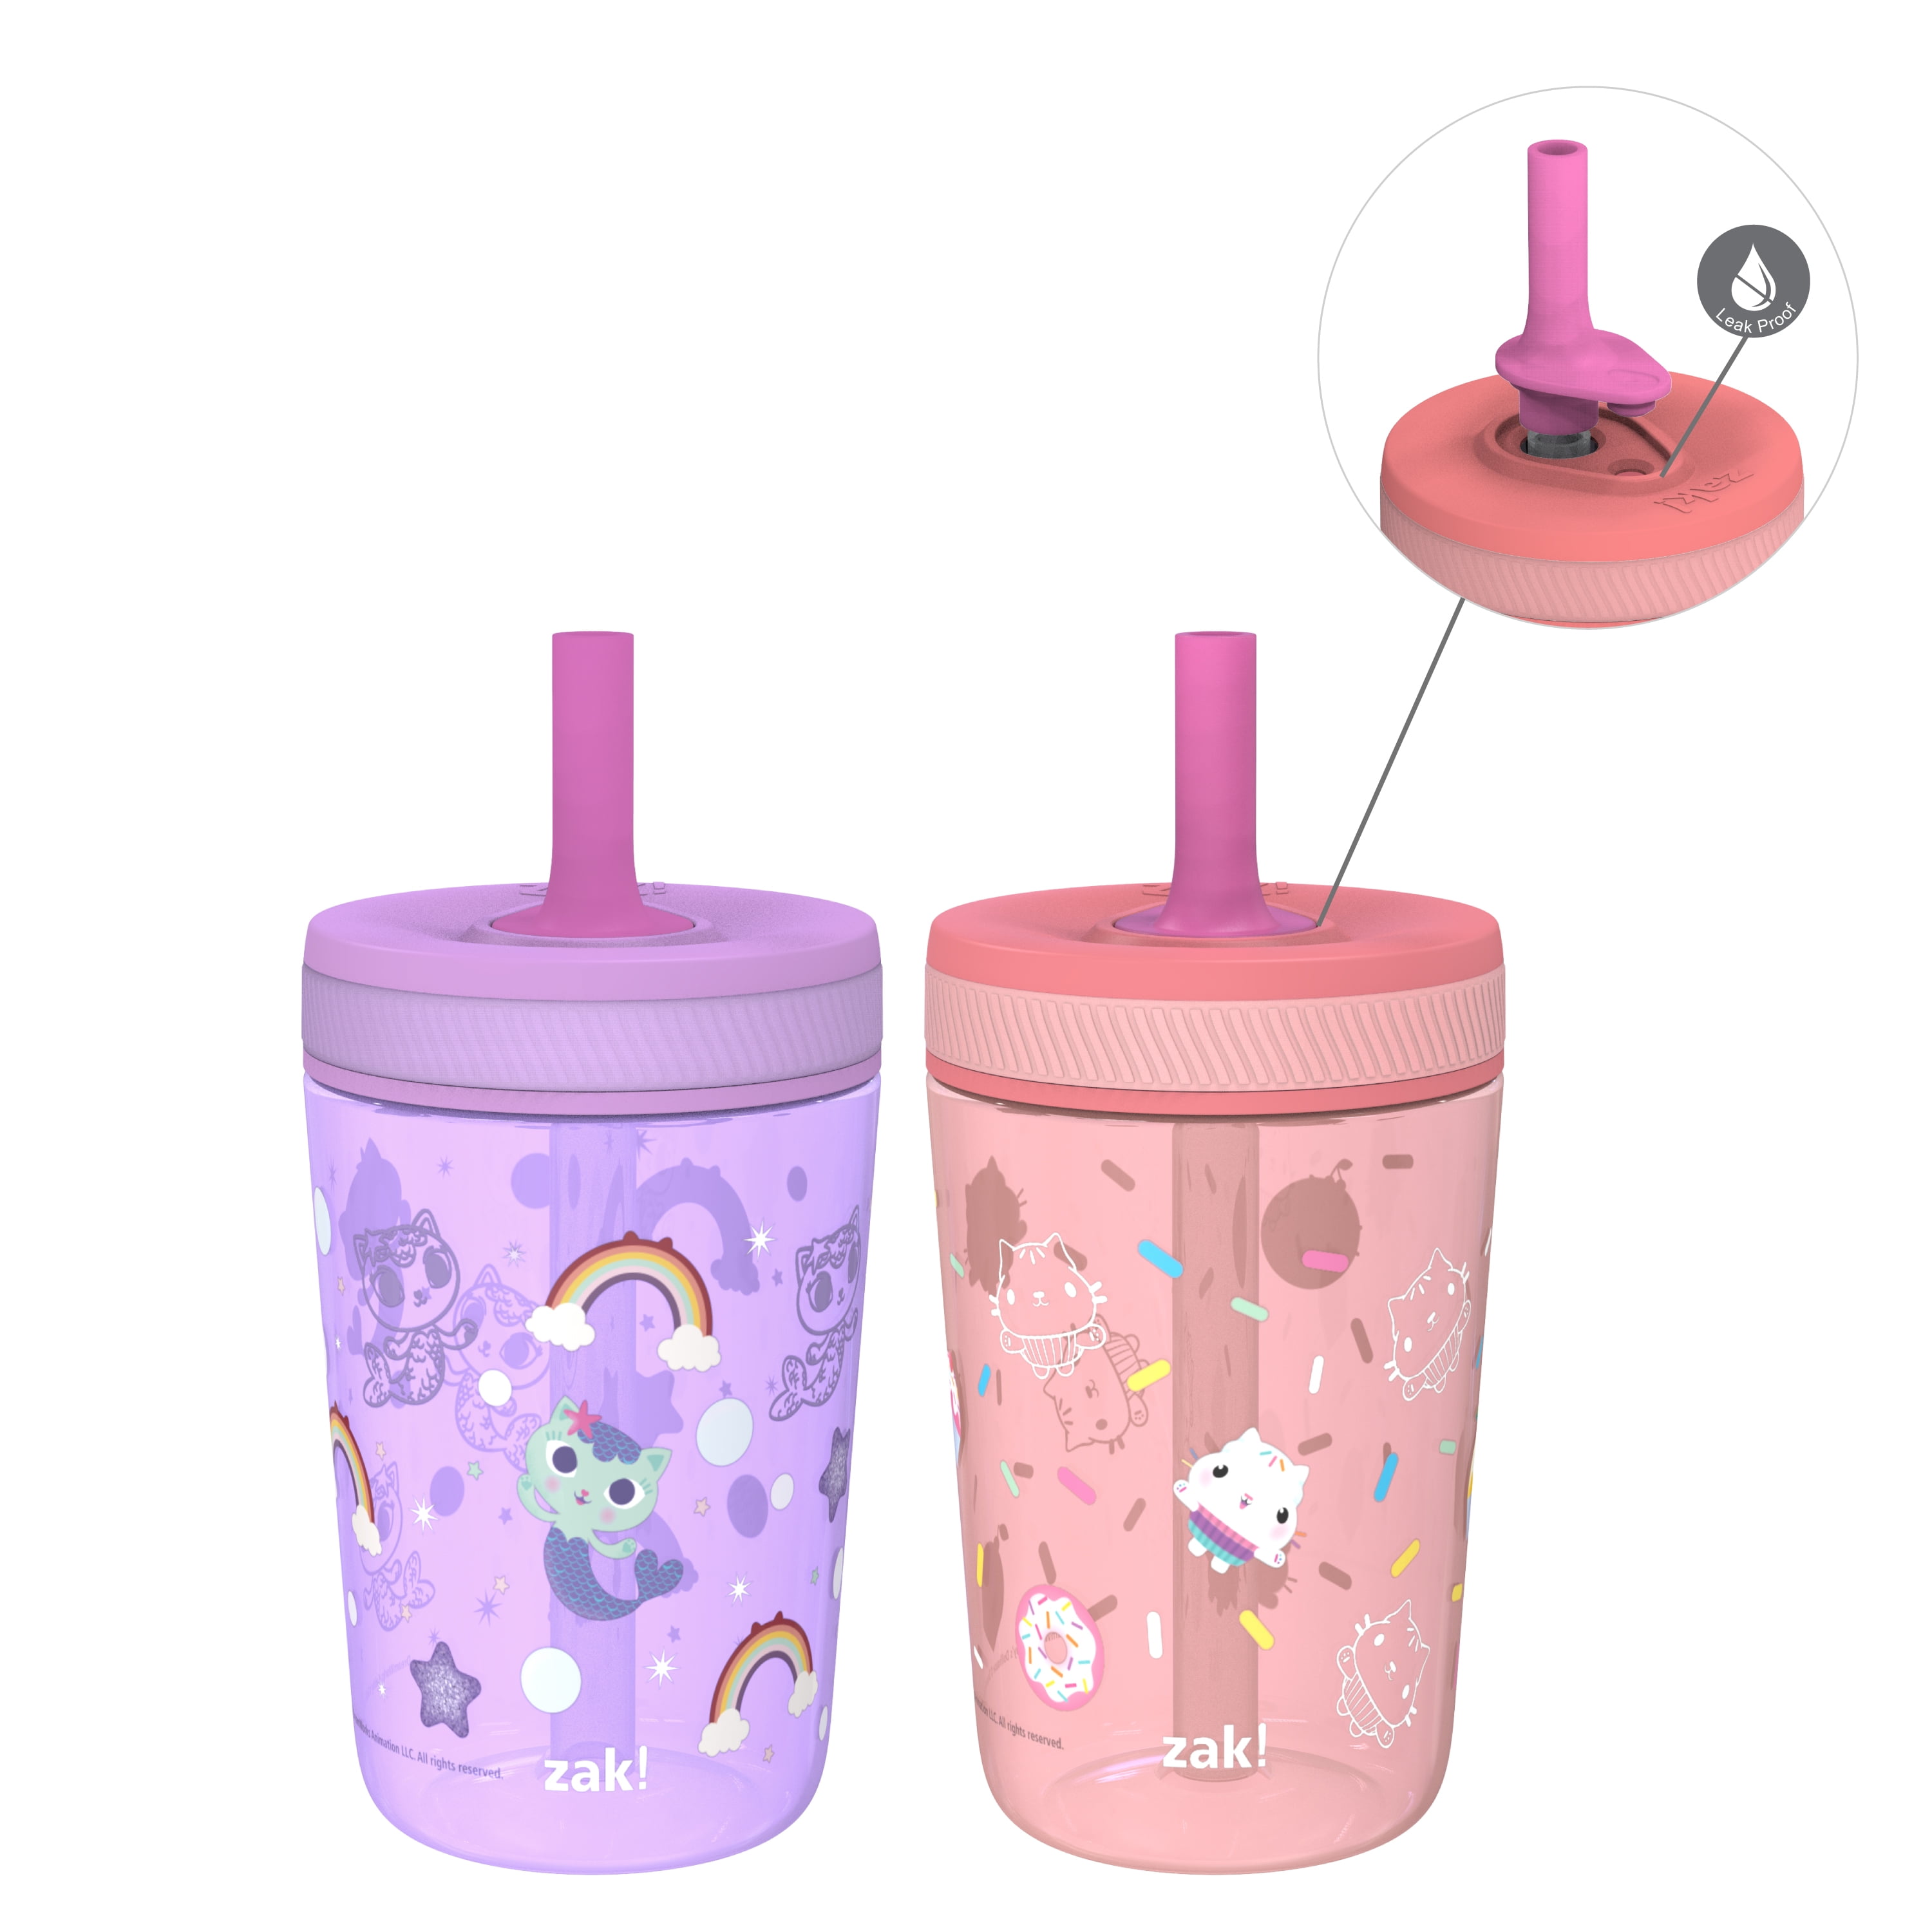 $1 Kids Tumblers for Parties and Reunions - Gluesticks Blog